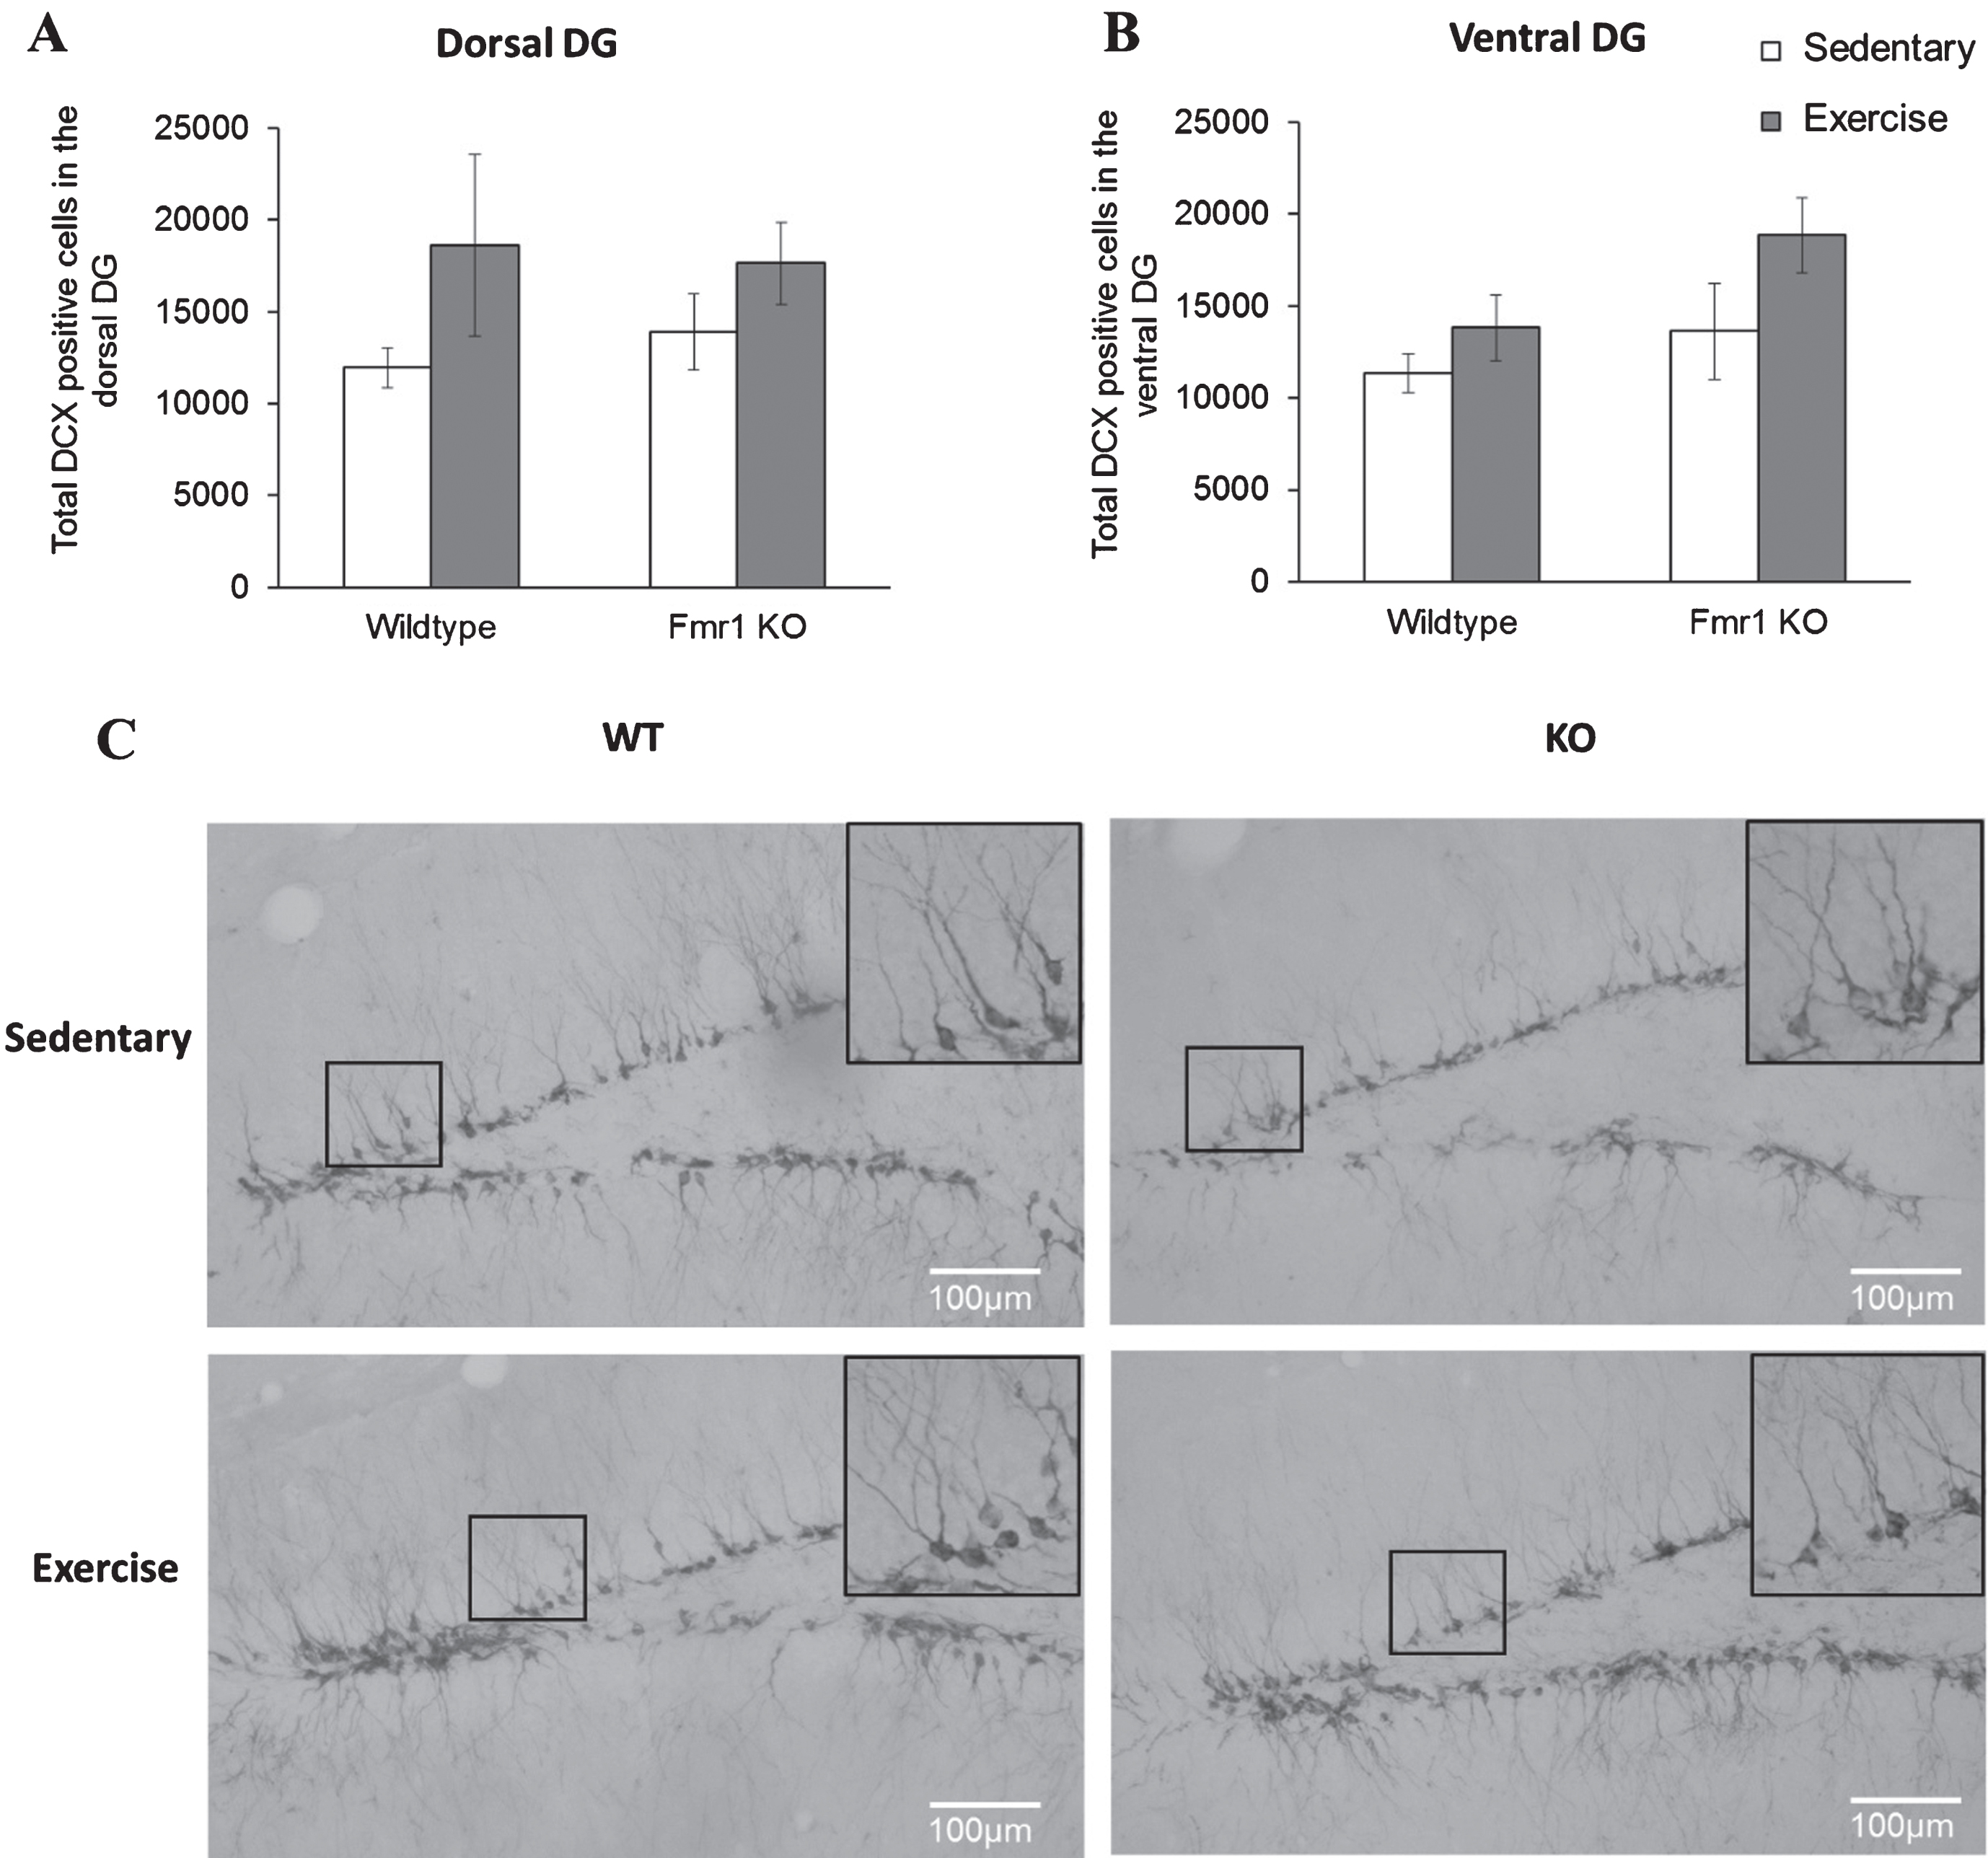 Long-term running did not influence the number of newborn neurons in Fmr1 KO mice. (A, B) The number or DCX positive neurons remained unaltered by long-tern running in both dorsal and ventral hippocampus (*p < 0.05). (C) Representative images of DCX-positive cells. Scale bar: 100μm.